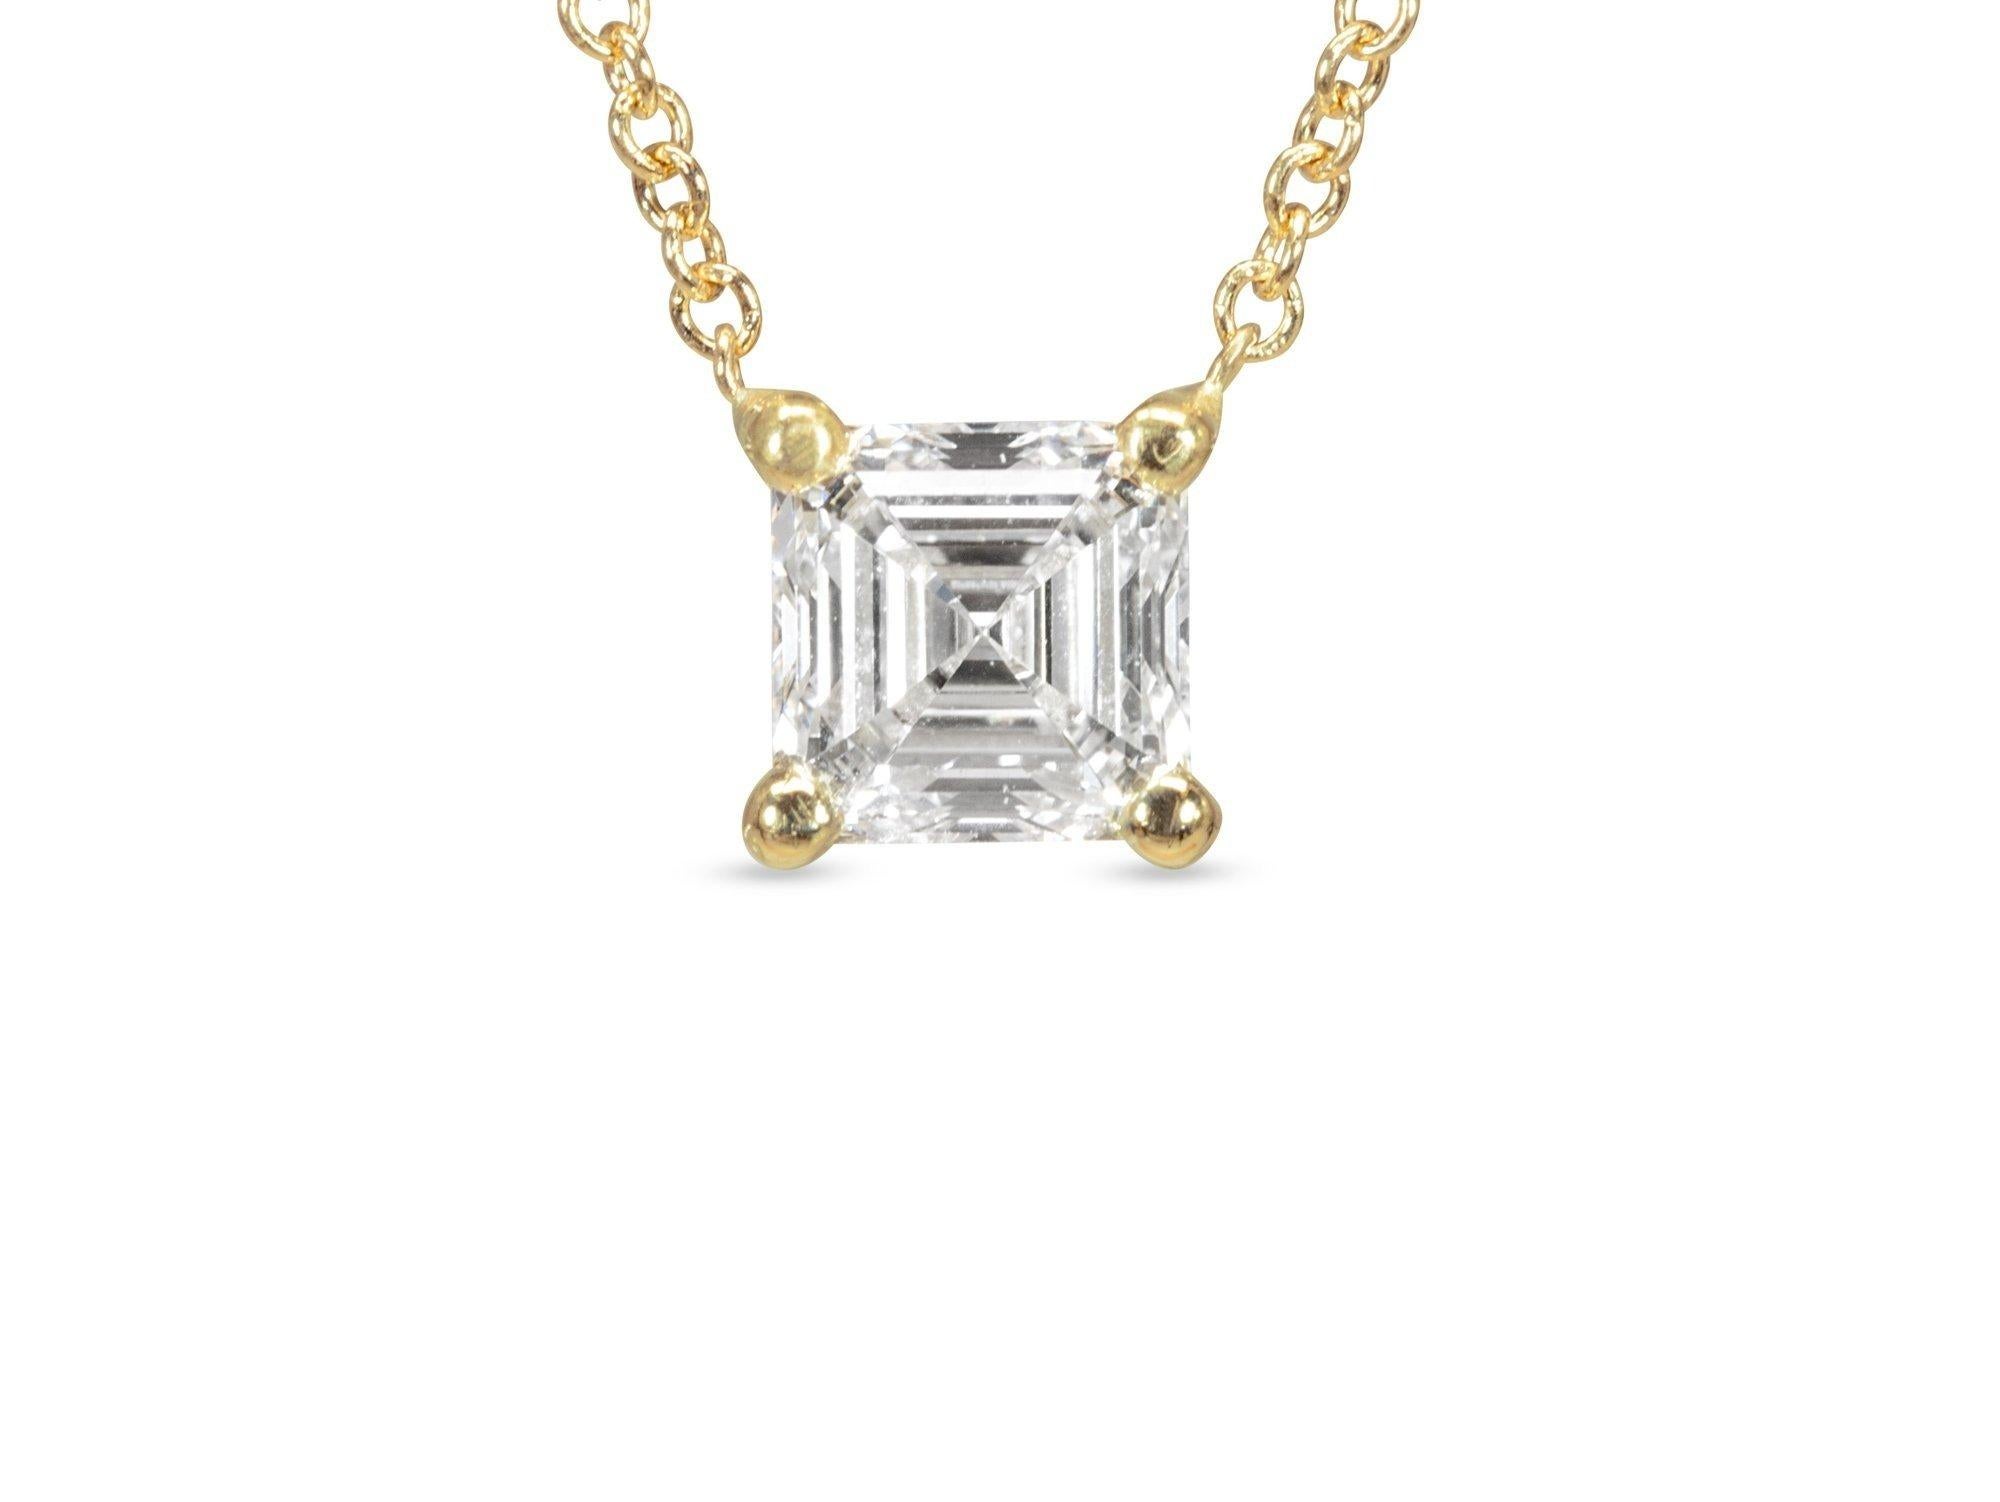 Women's Stunning Necklace with a dazzling 1-carat square cut natural diamond